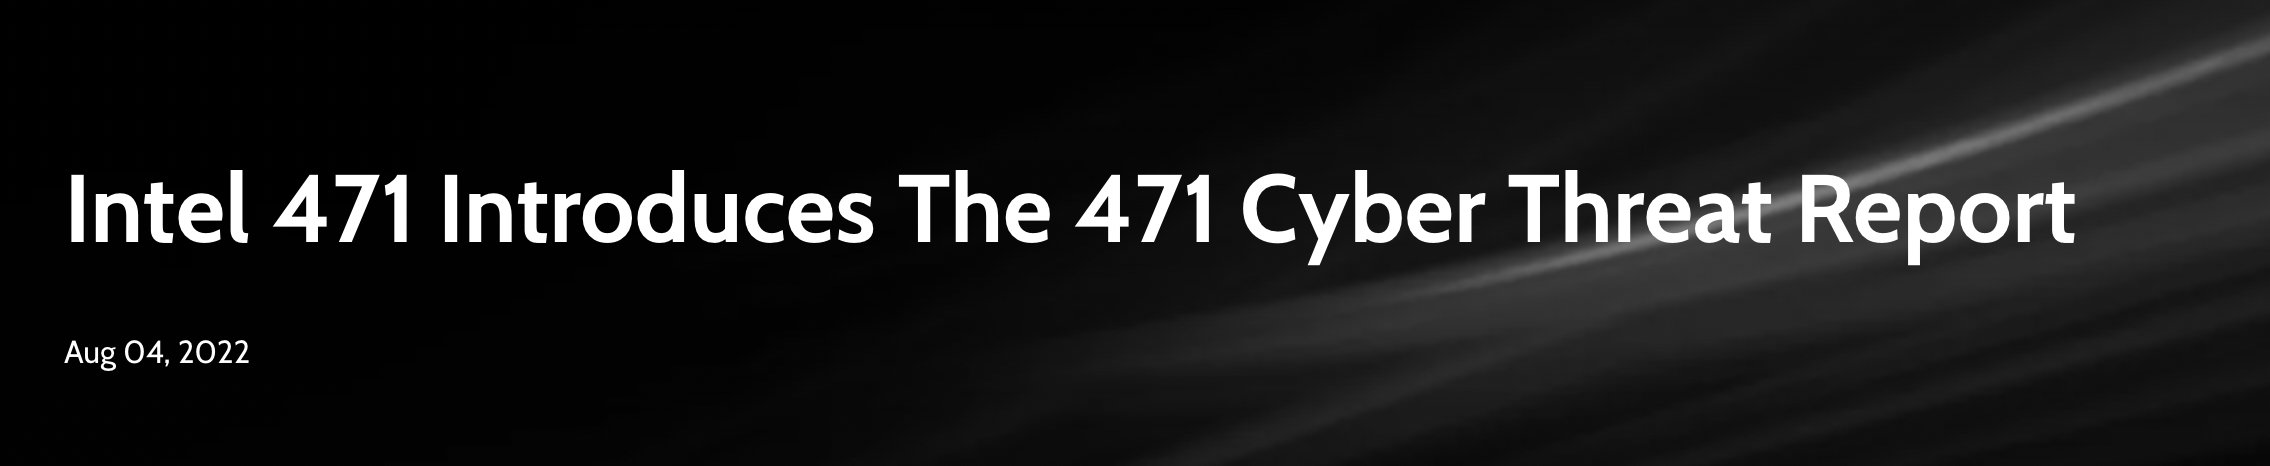 Intel 471 Introduces The 471 Cyber Threat Report